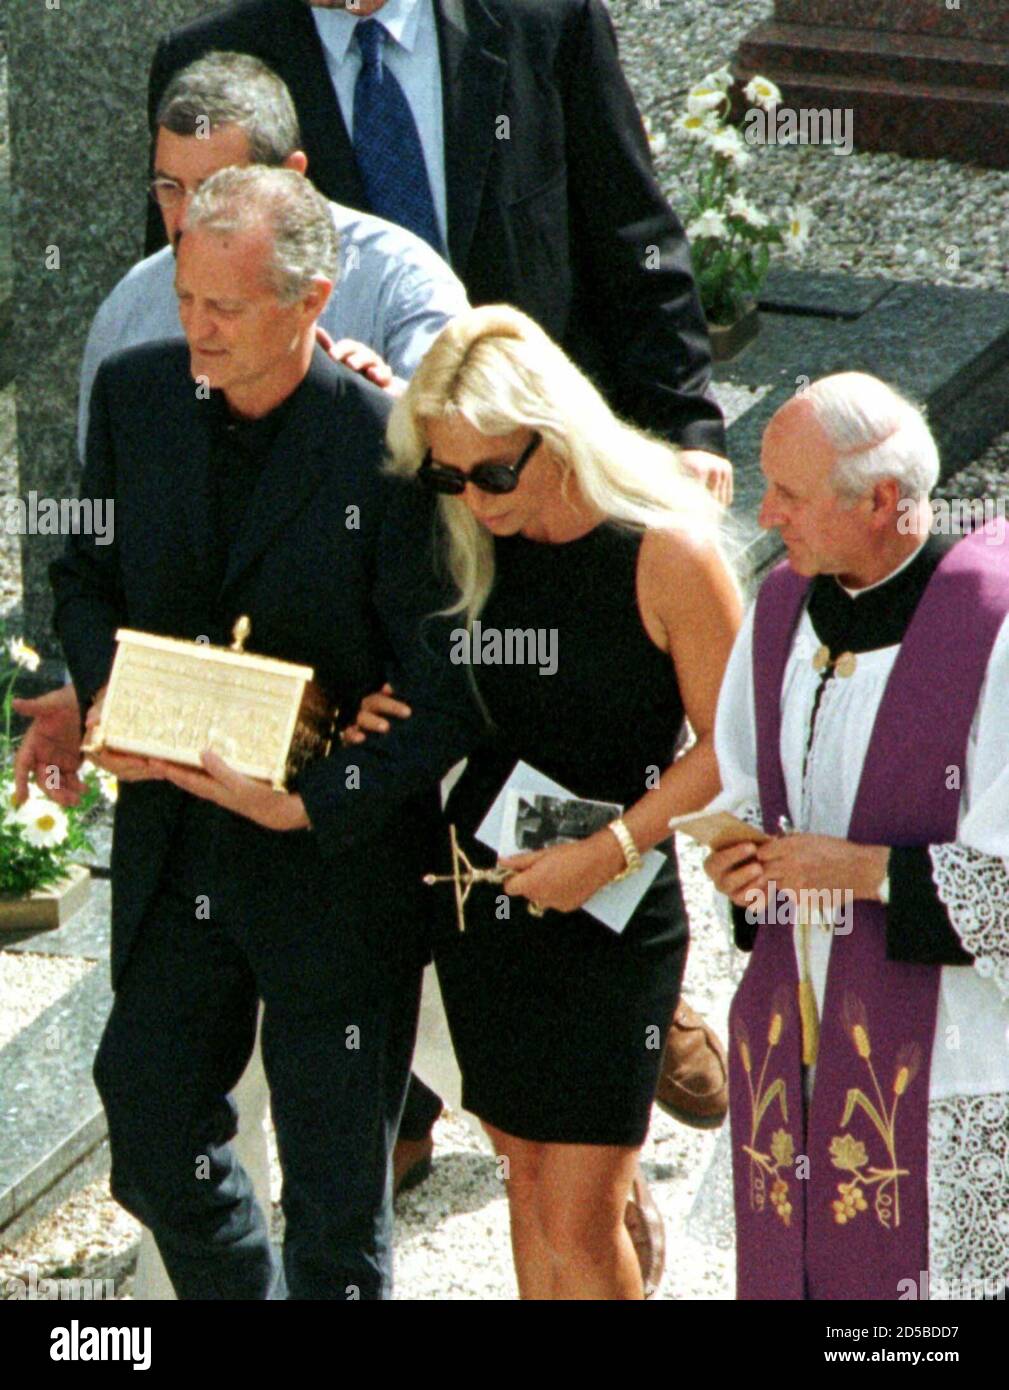 Santo Versace (L), brother of fashion designer Gianni Versace who was  killed outside his Miami home on Tuesday, brings the ashes of Gianni Versace  into the cemetery accompanied by Donatella Versace, sister